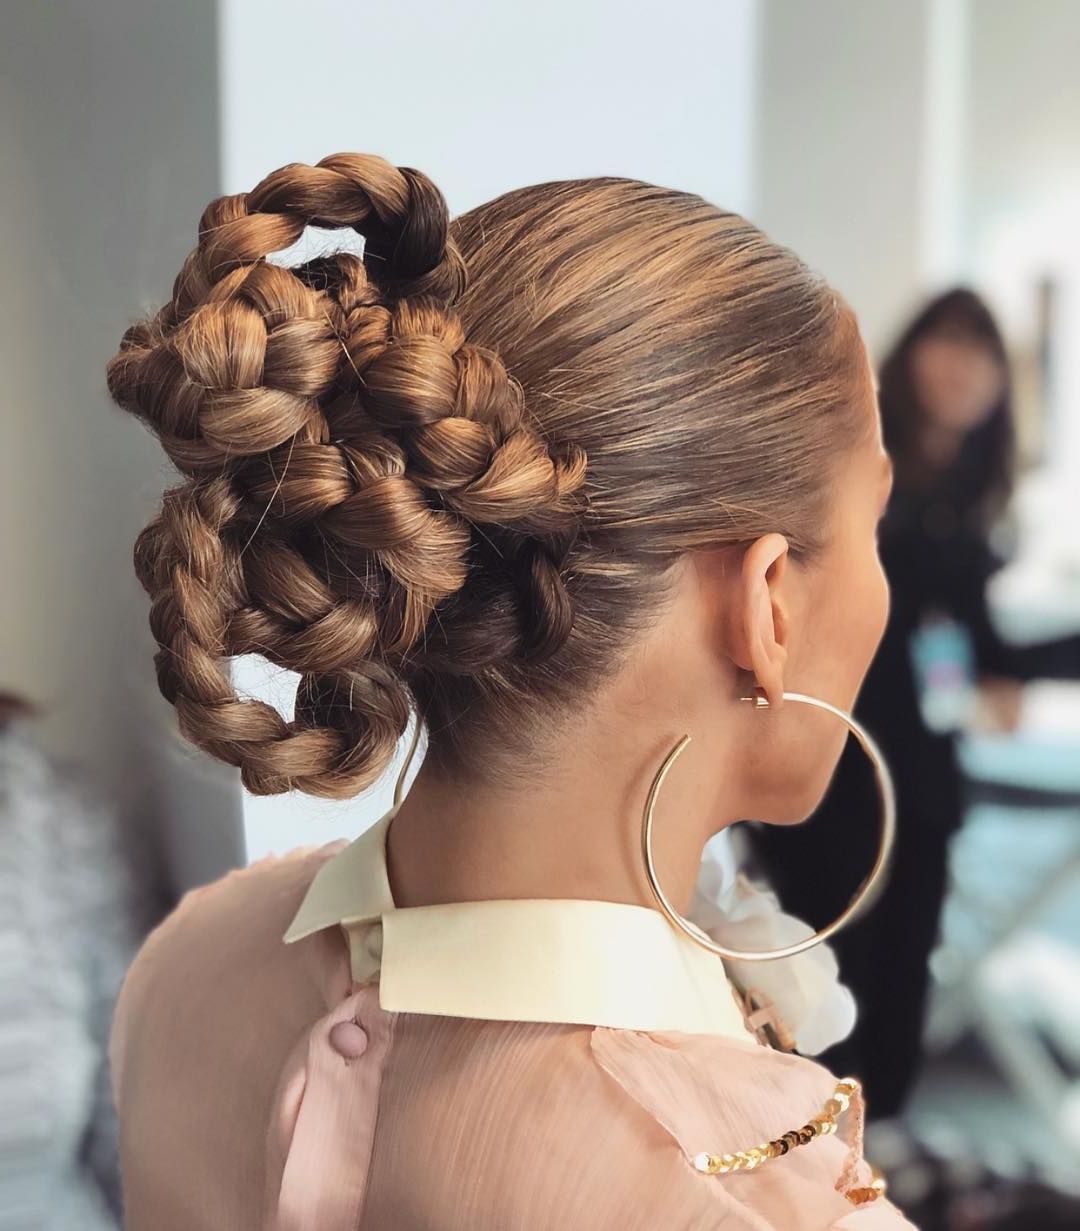 20 Braided Updo Hairstyles – Pictures Of Pretty Updos With Braids Intended For Braided Updo For Long Hair (Photo 22 of 25)